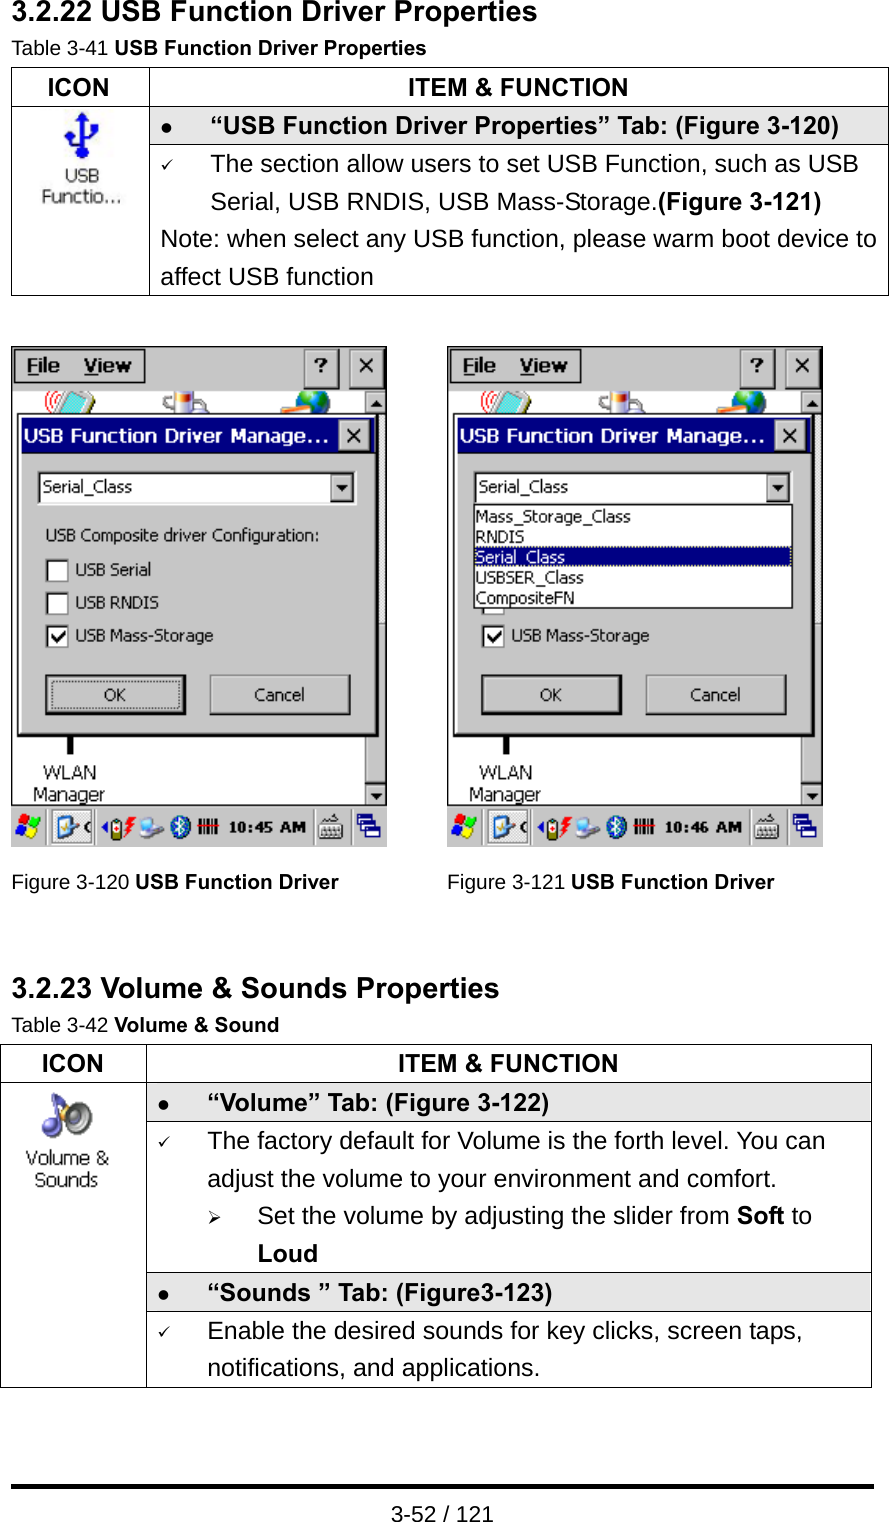  3-52 / 121 3.2.22 USB Function Driver Properties Table 3-41 USB Function Driver Properties   ICON  ITEM &amp; FUNCTION z “USB Function Driver Properties” Tab: (Figure 3-120)  9 The section allow users to set USB Function, such as USB Serial, USB RNDIS, USB Mass-Storage.(Figure 3-121) Note: when select any USB function, please warm boot device toaffect USB function     Figure 3-120 USB Function Driver Figure 3-121 USB Function Driver   3.2.23 Volume &amp; Sounds Properties Table 3-42 Volume &amp; Sound ICON  ITEM &amp; FUNCTION z “Volume” Tab: (Figure 3-122) 9 The factory default for Volume is the forth level. You can adjust the volume to your environment and comfort.   ¾ Set the volume by adjusting the slider from Soft to Loud z “Sounds ” Tab: (Figure3-123)  9 Enable the desired sounds for key clicks, screen taps, notifications, and applications.  